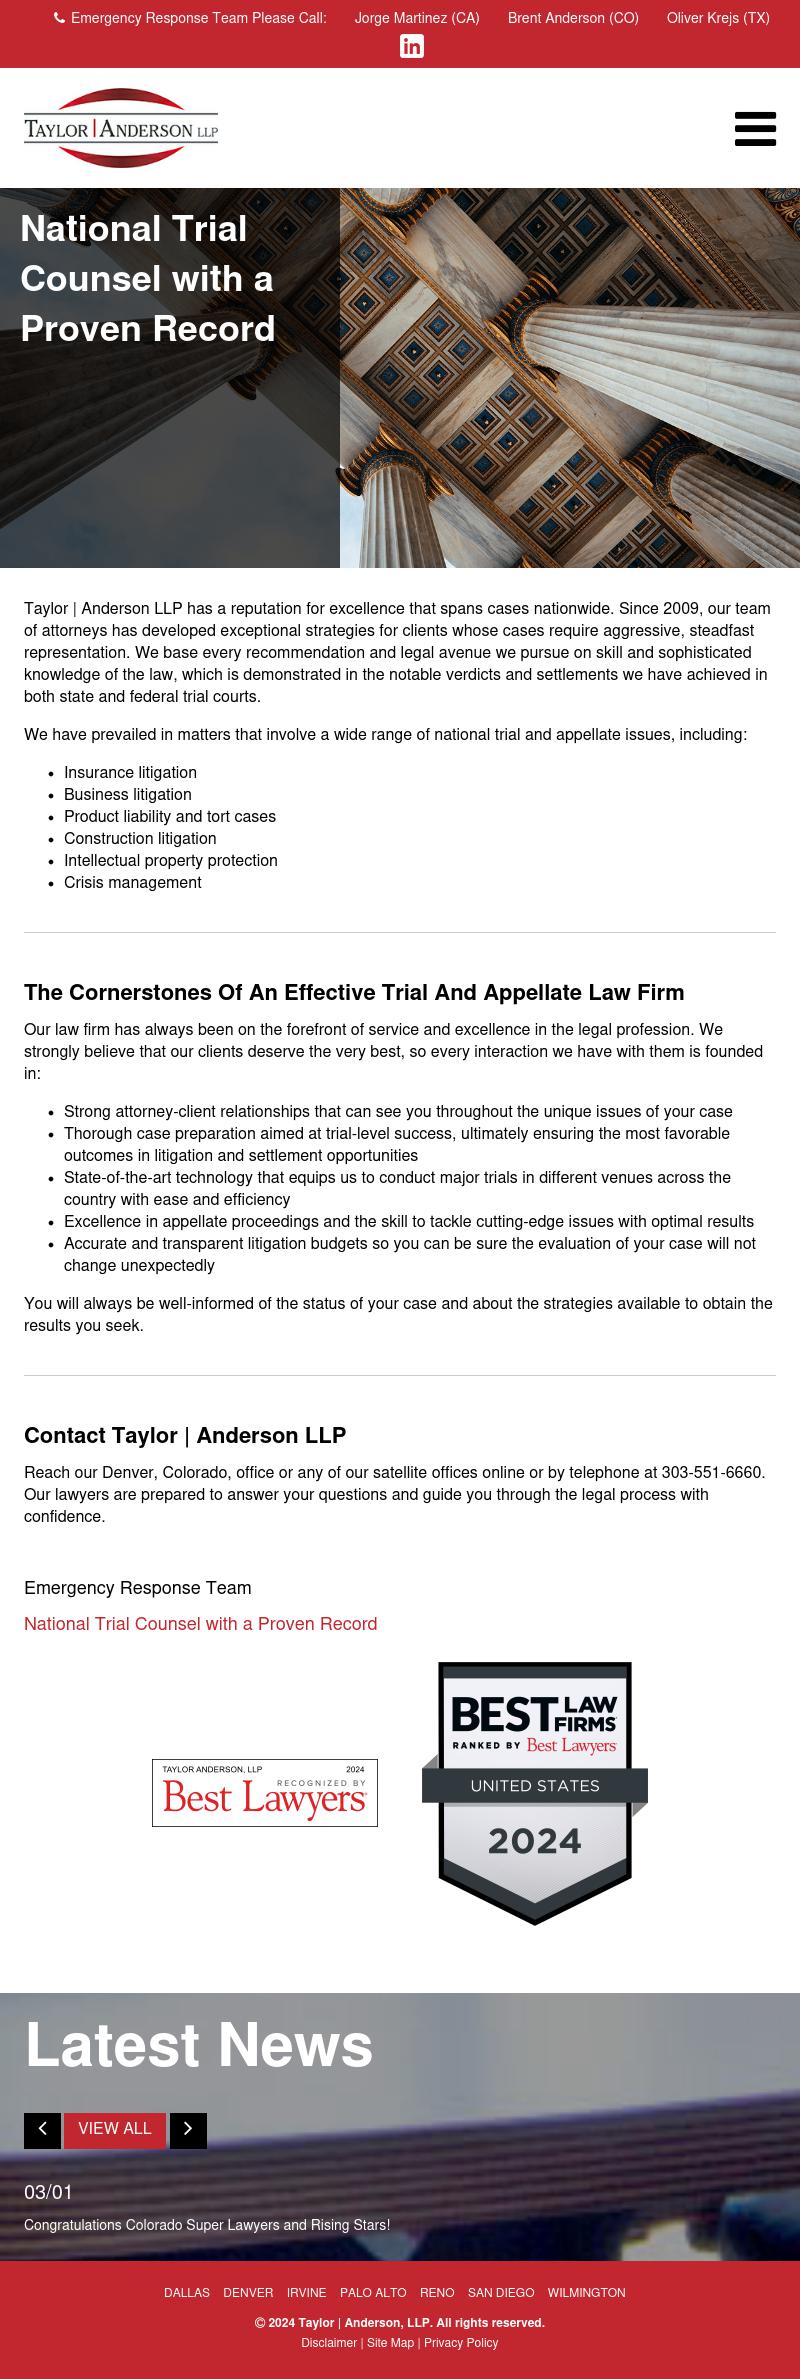 Taylor | Anderson, LLP - Irvine CA Lawyers